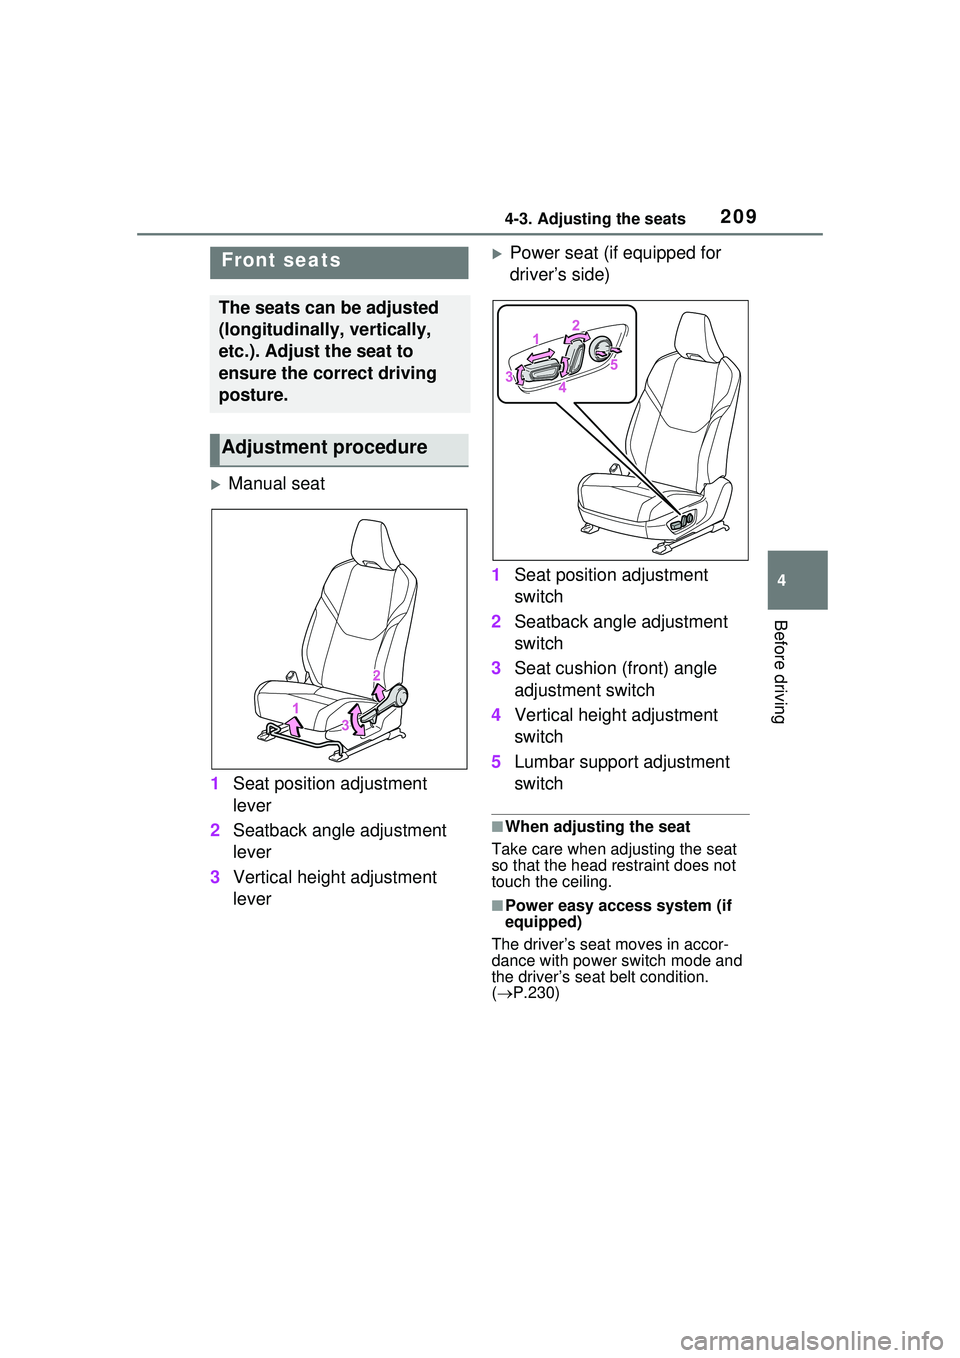 TOYOTA PRIUS PRIME 2023  Owners Manual 2094-3. Adjusting the seats
4
Before driving
4-3.Adjusting the seats
Manual seat
1 Seat position adjustment 
lever
2 Seatback angle adjustment 
lever
3 Vertical height adjustment 
lever
Power se